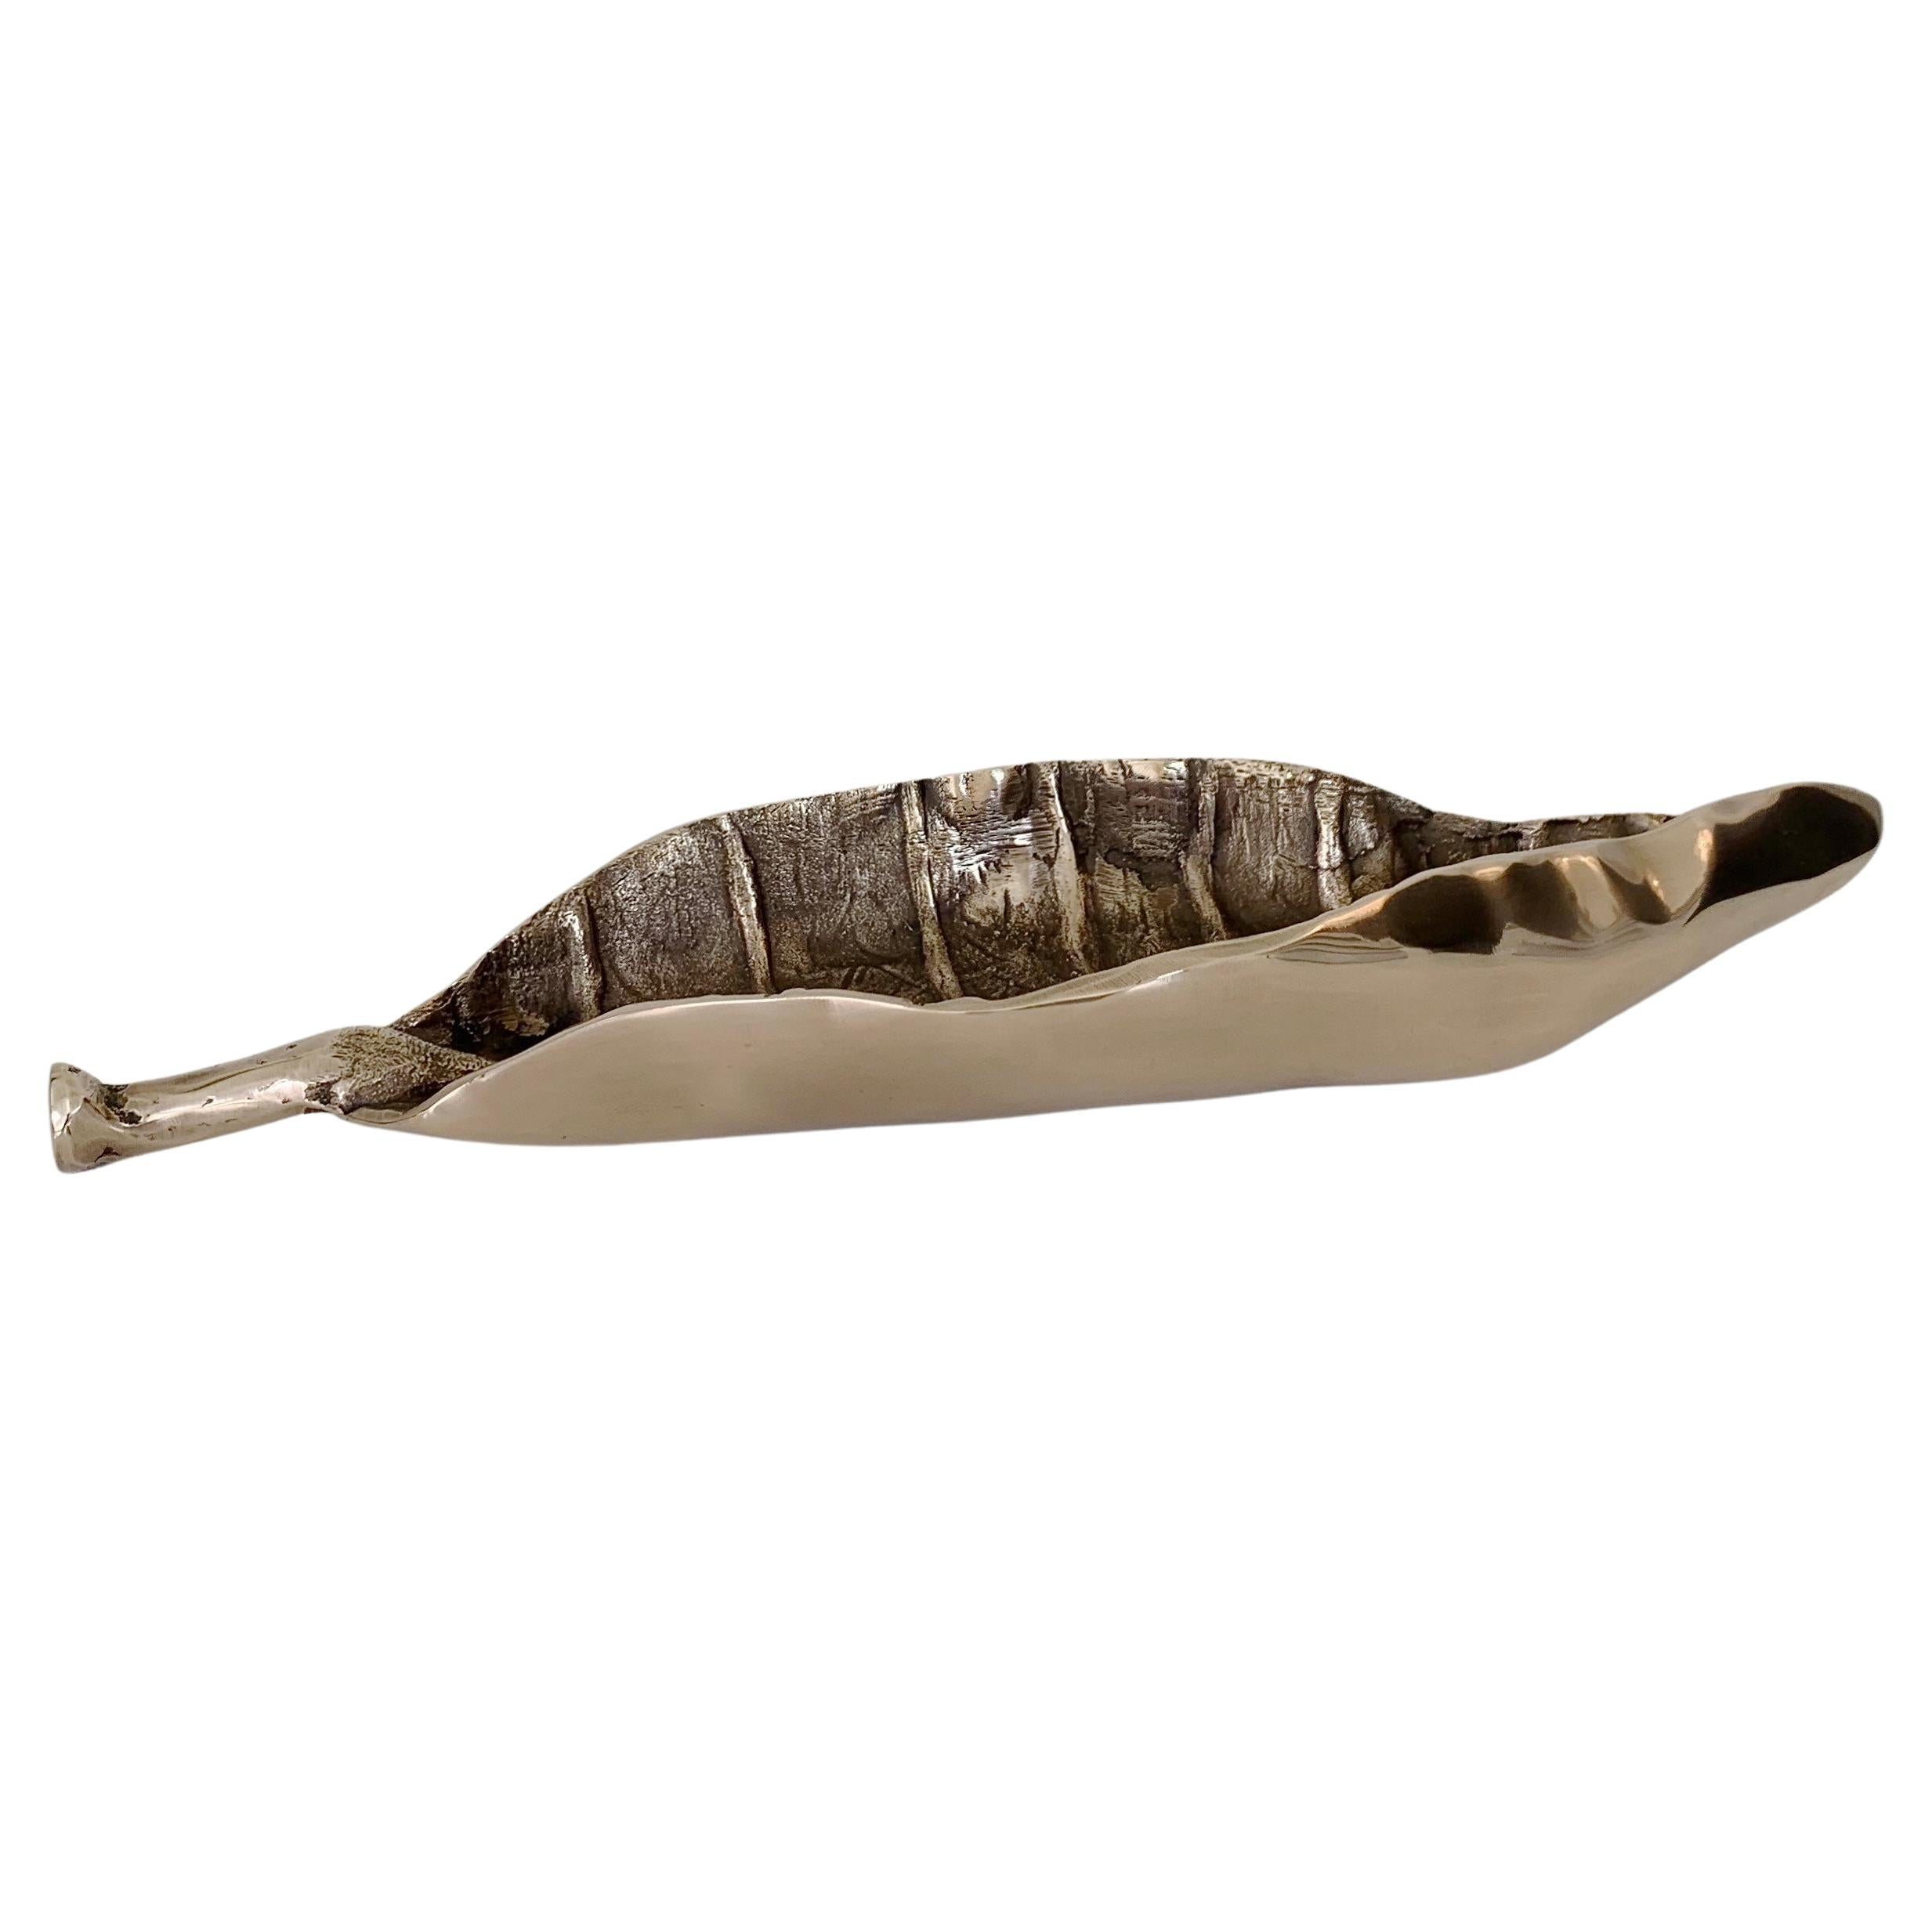 Decorative mid-century leaf-shaped vide-poche, circa 1970, France.
Polished gilt bronze.
Dimensions: 29 cm W, 9 cm D, 4 cm H.
Nice quality in good original condition.
All purchases are covered by our Buyer Protection Guarantee.
This item can be